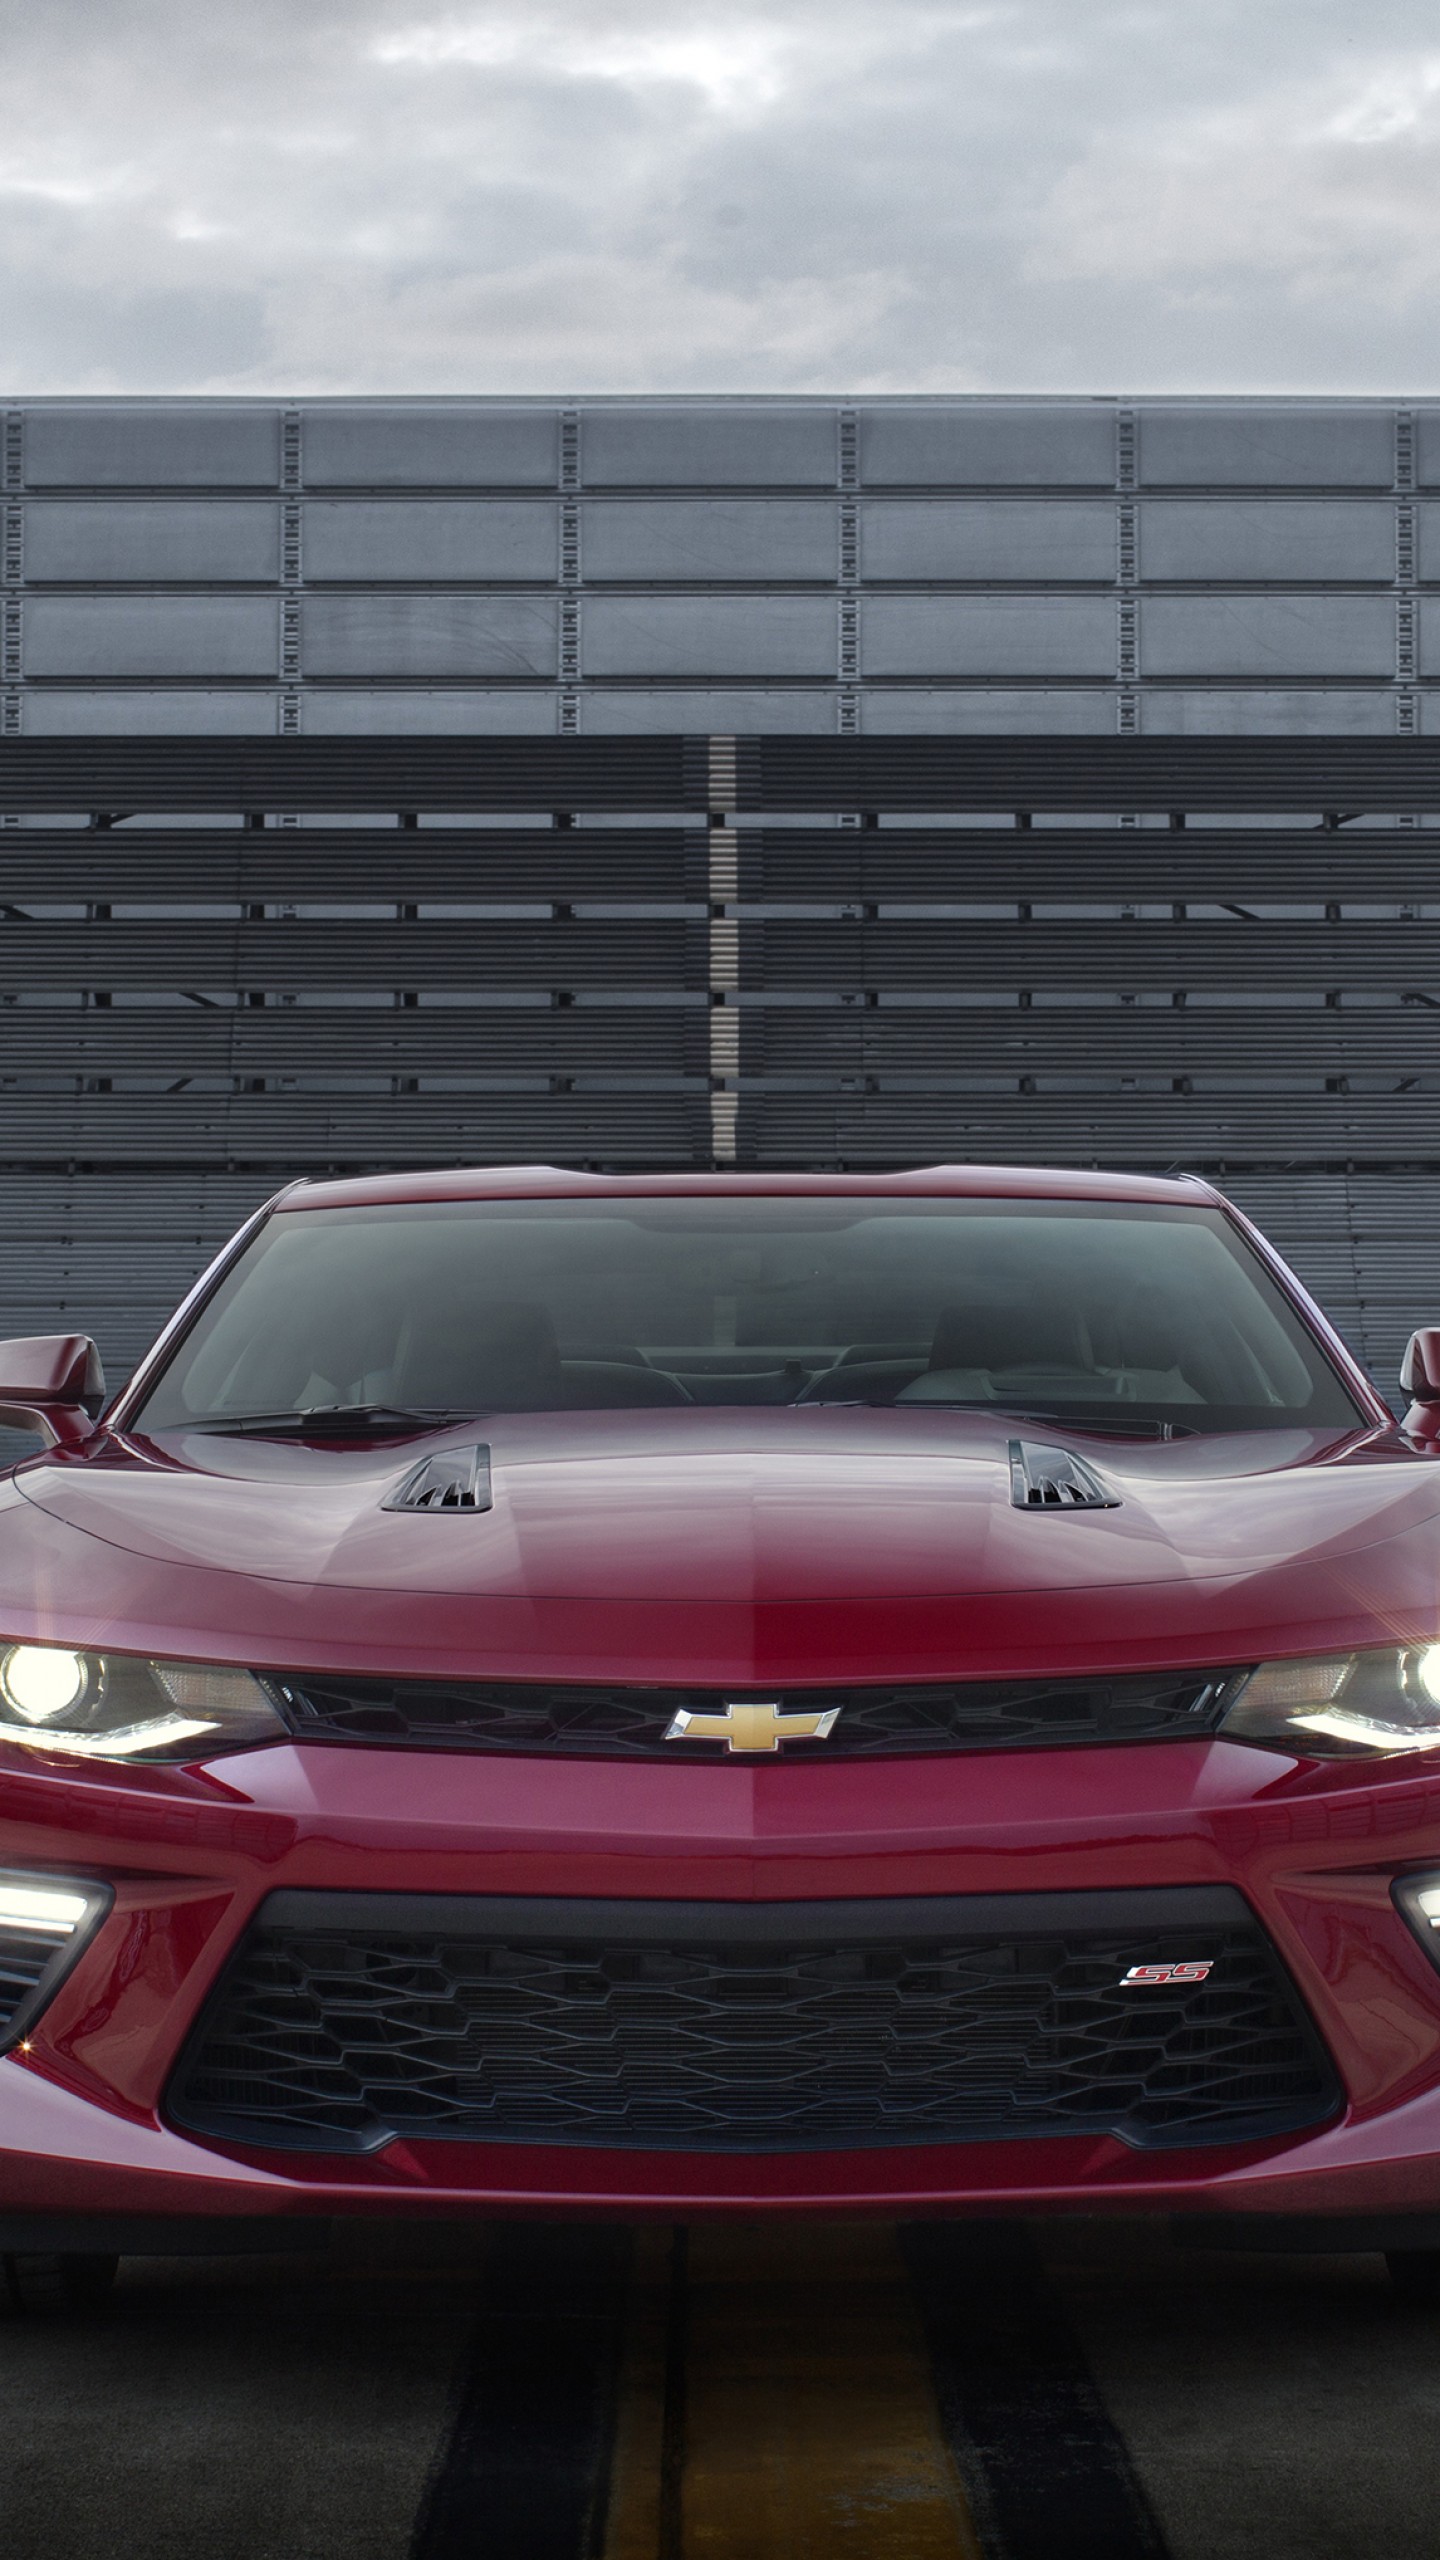 Red Camaro Wallpapers